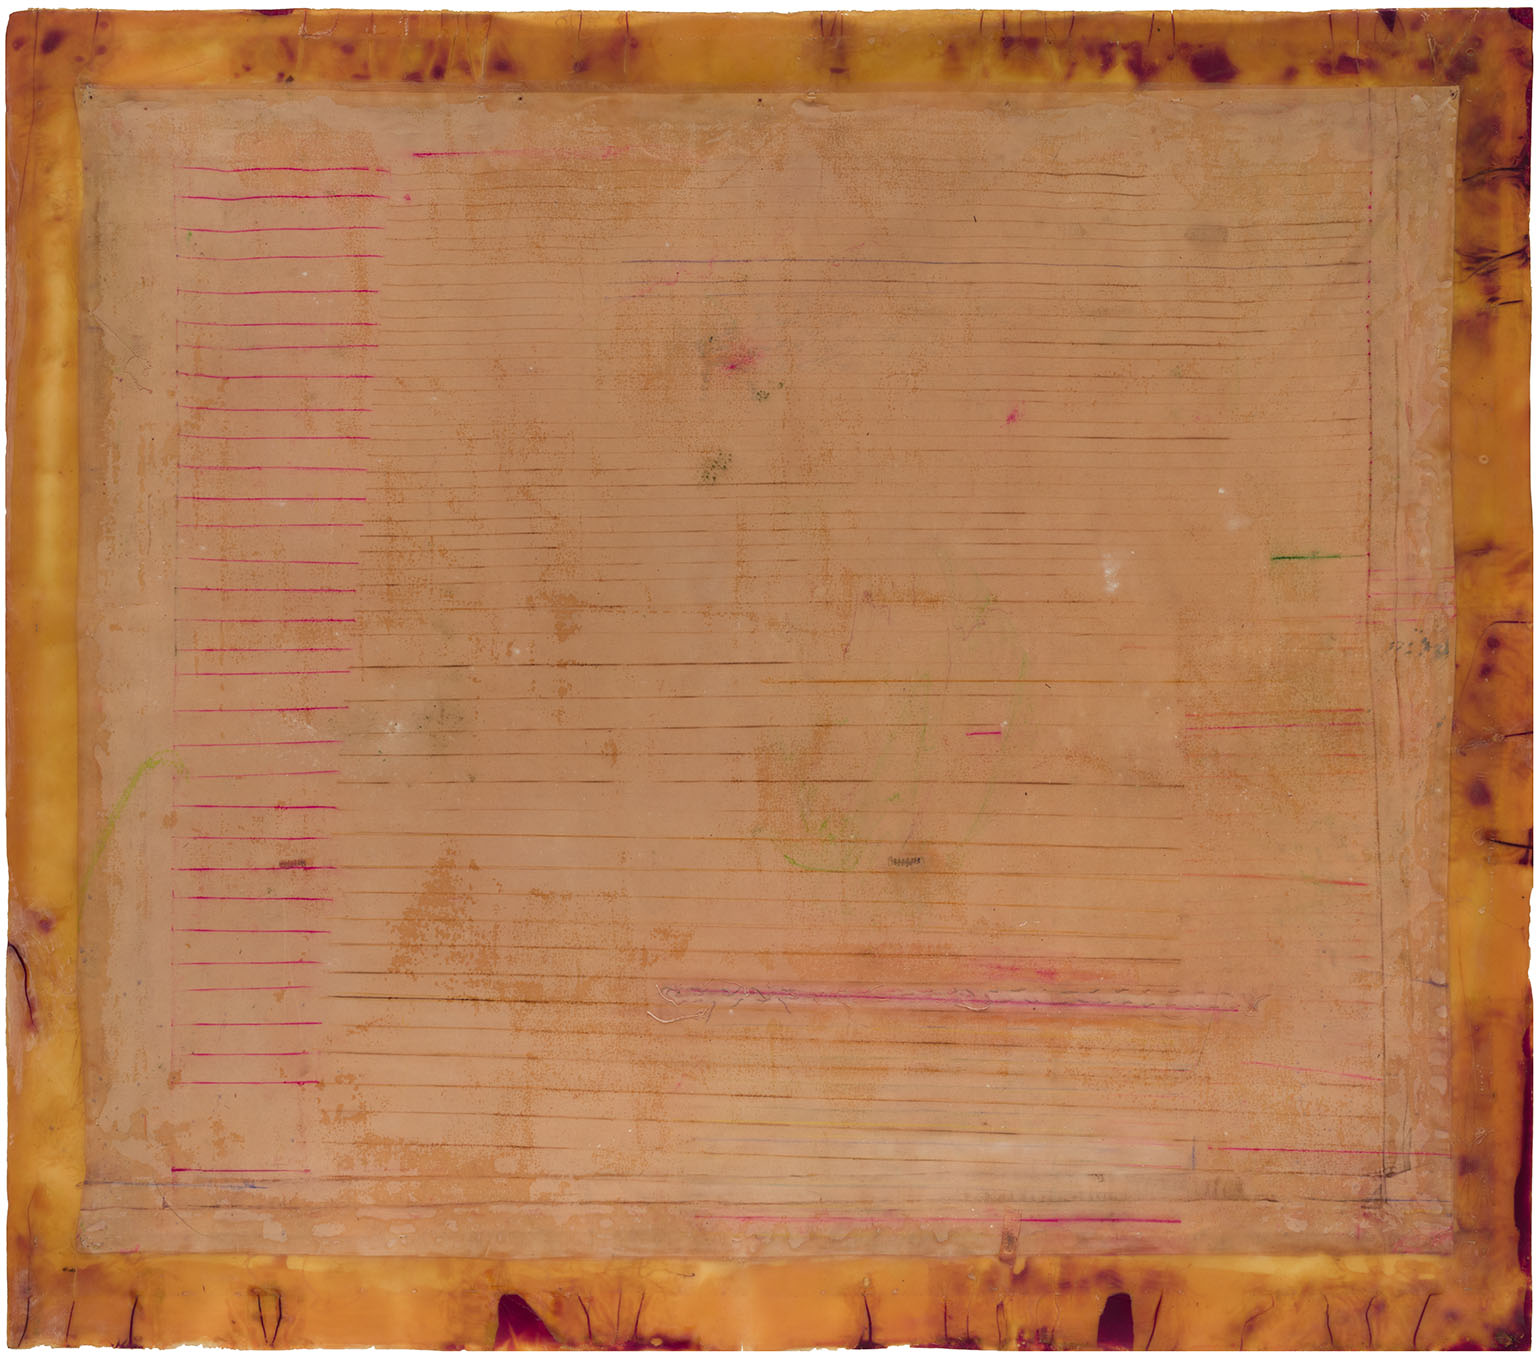 Ed Moses, <em>Untitled</em>, 1971, Powdered pigment, acrylic and resin on canvas. 88 x 99 in. UCI Jack and Shanaz Langson Institute and Museum of California Art, Gift of Ryan Collier